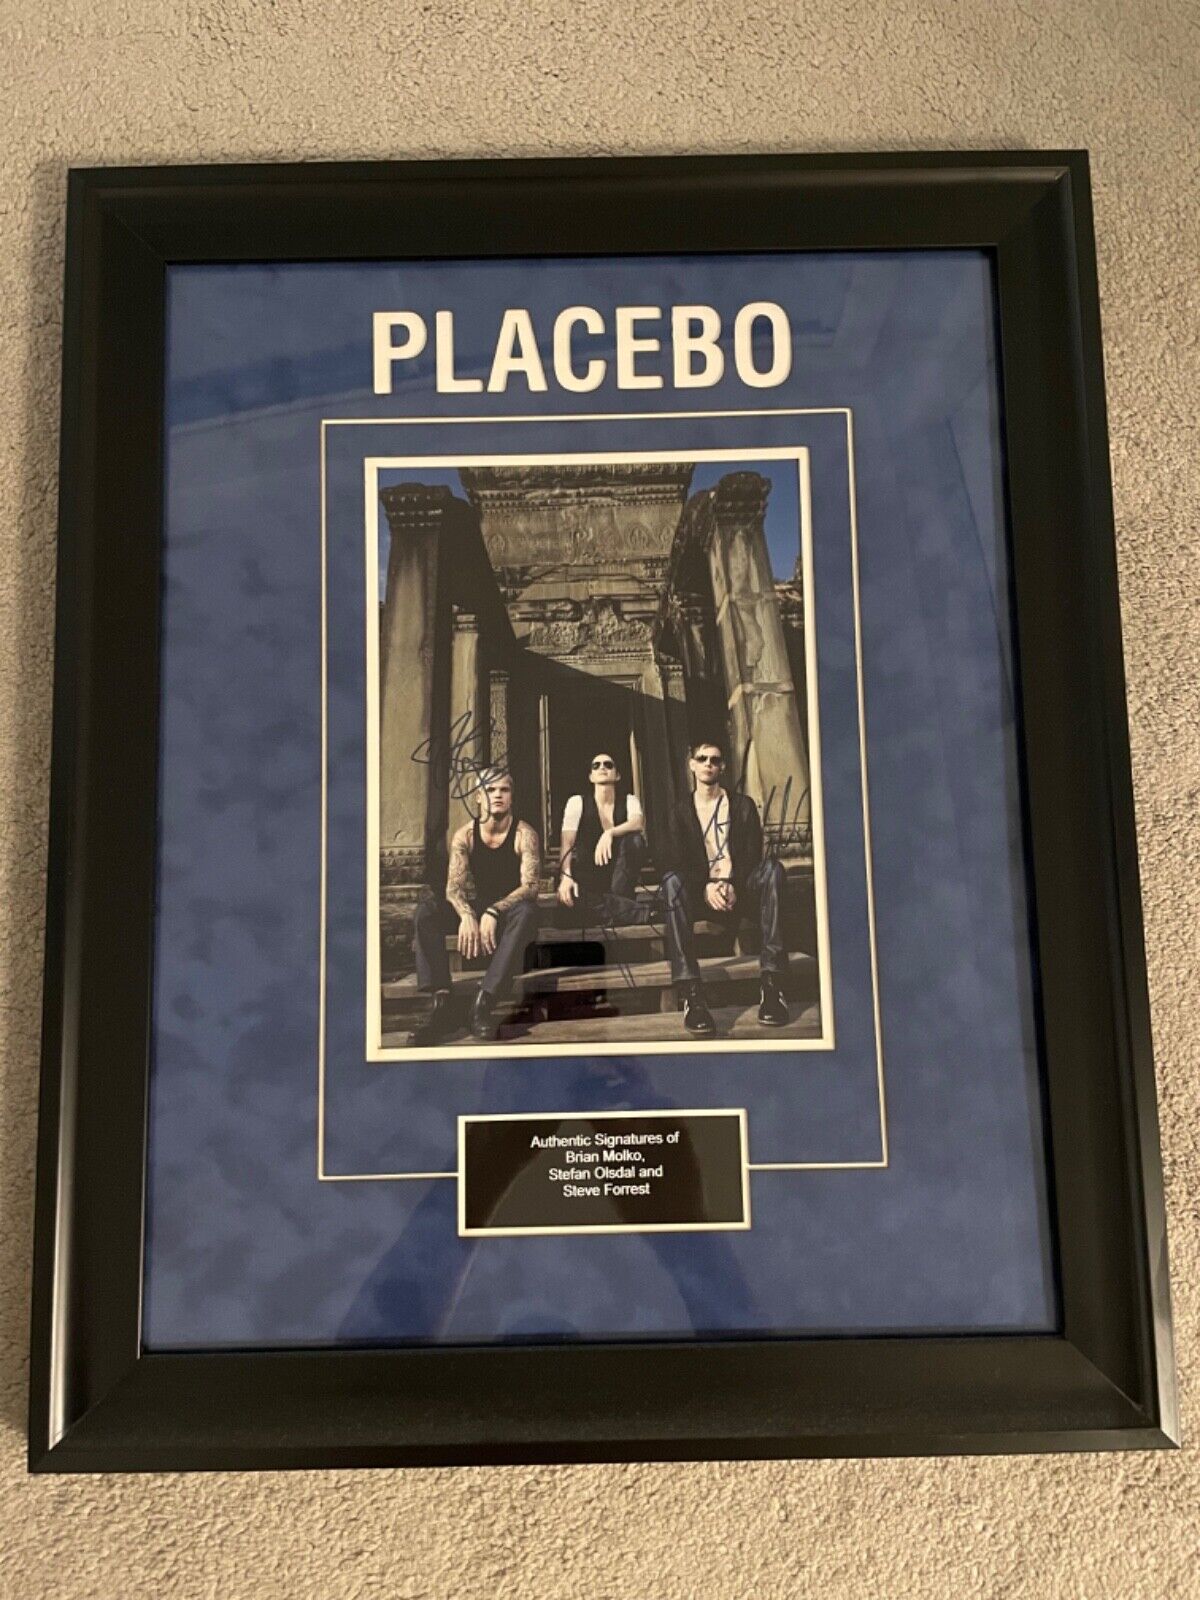 SIGNED PLACEBO framed display / photo brian molko COA - in person 